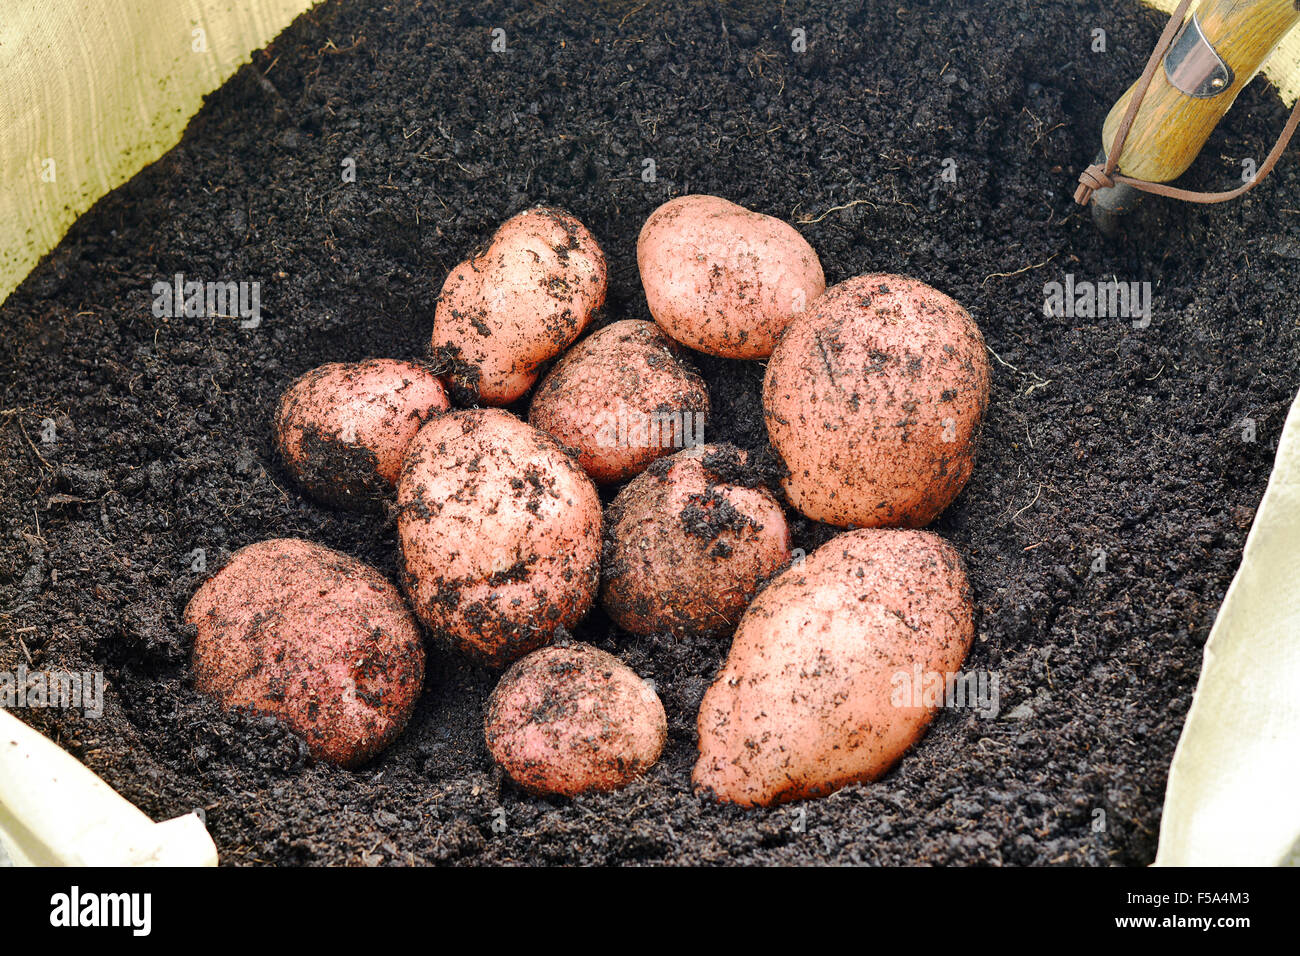 Freshly lifted organic potatoes grown in a garden from a grow bag in dark rich soil, unwashed selected focus, narrow depth of fi Stock Photo